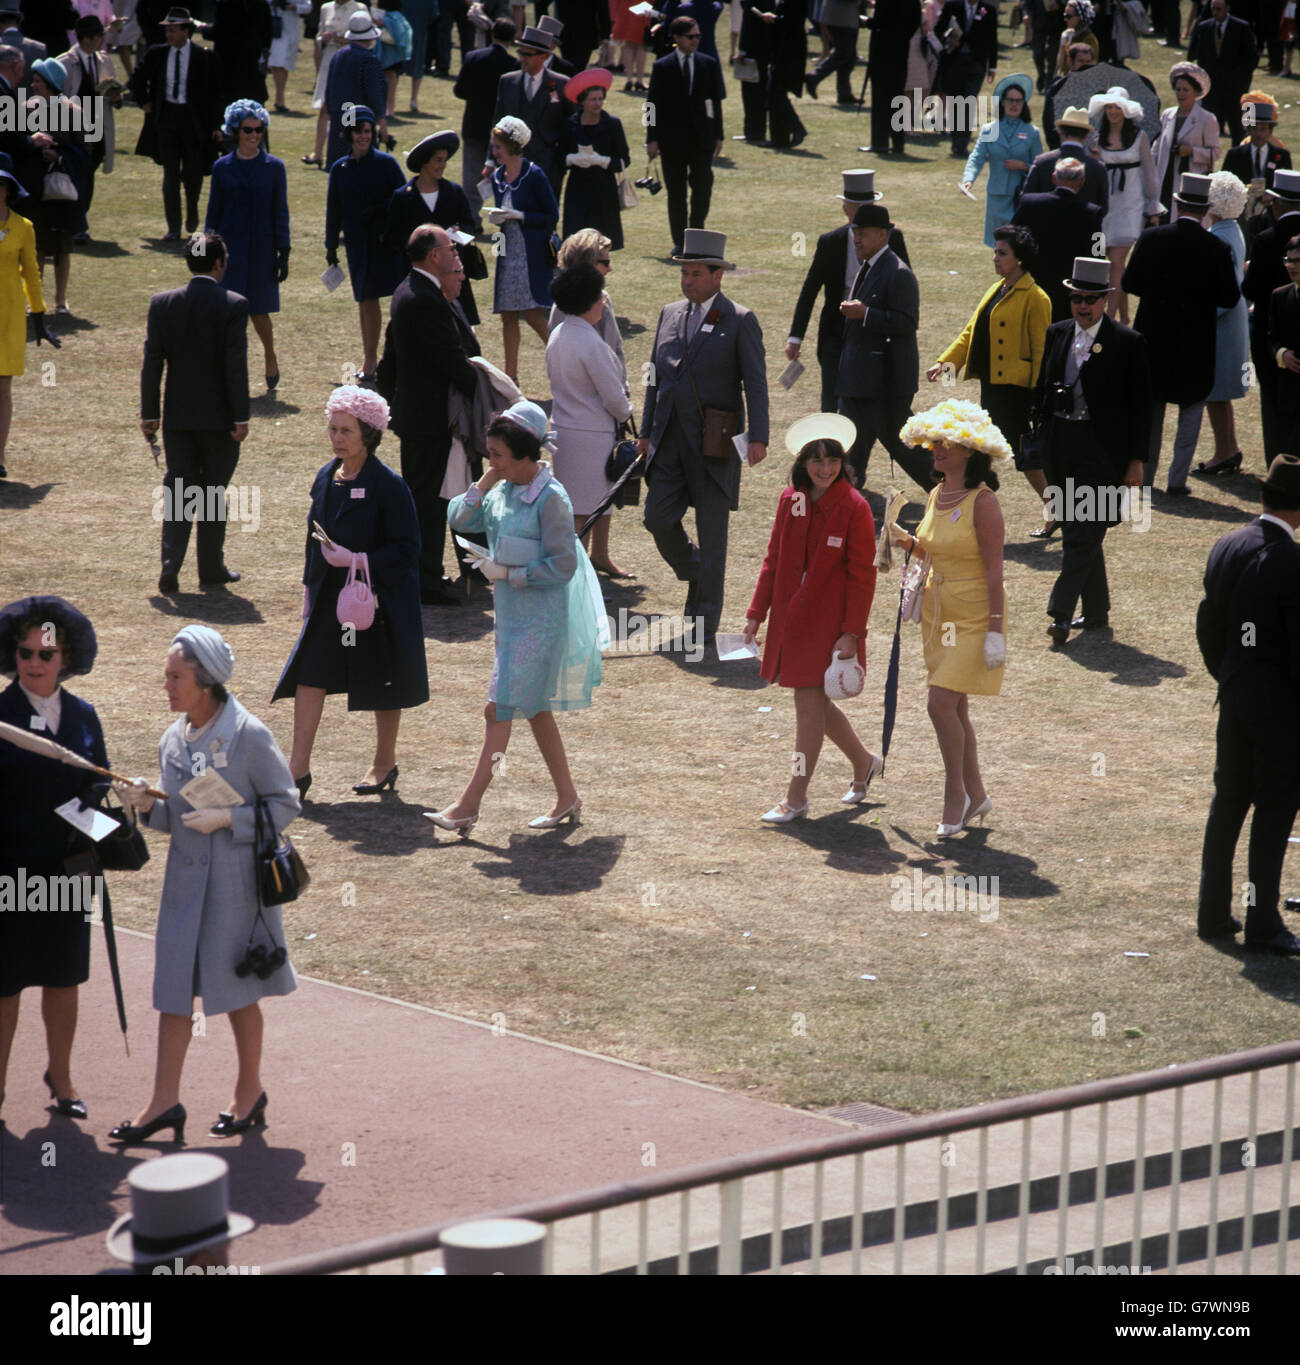 Horse Racing - Royal Ascot - Ascot Racecourse. Colourful dresses in the paddock area at Royal Ascot. Stock Photo